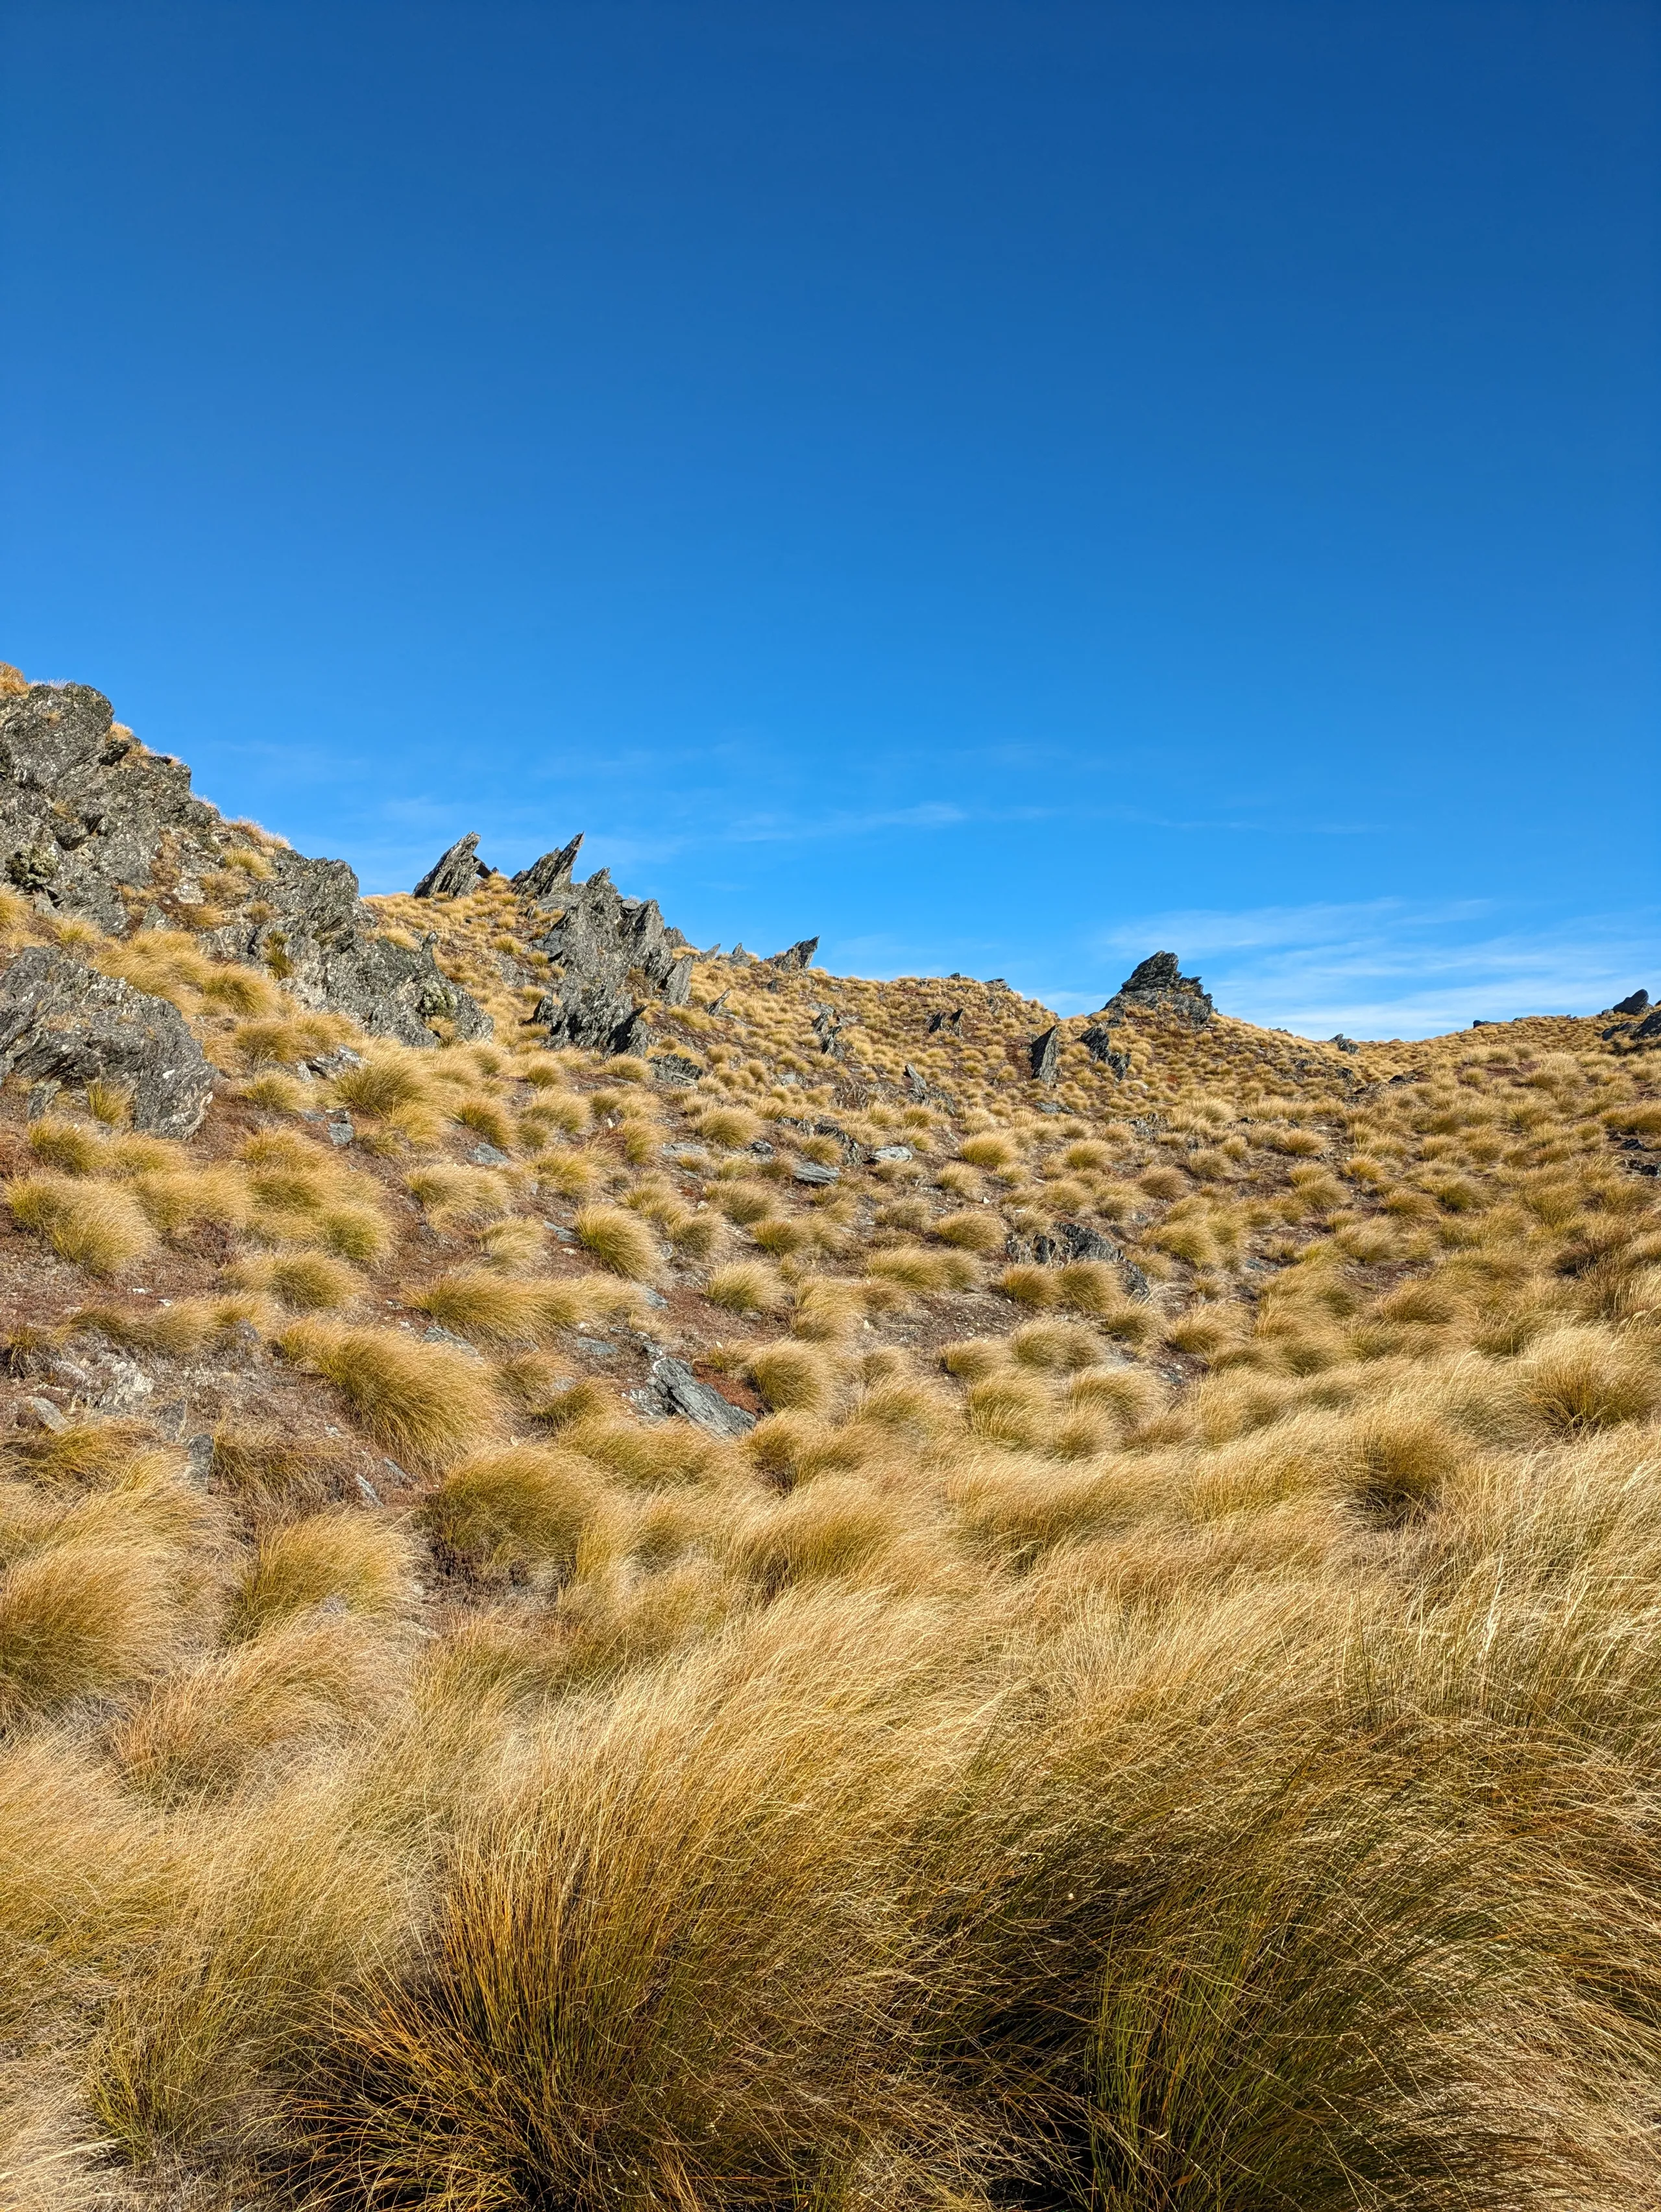 Dramatic rock and tussock scenery along the tops